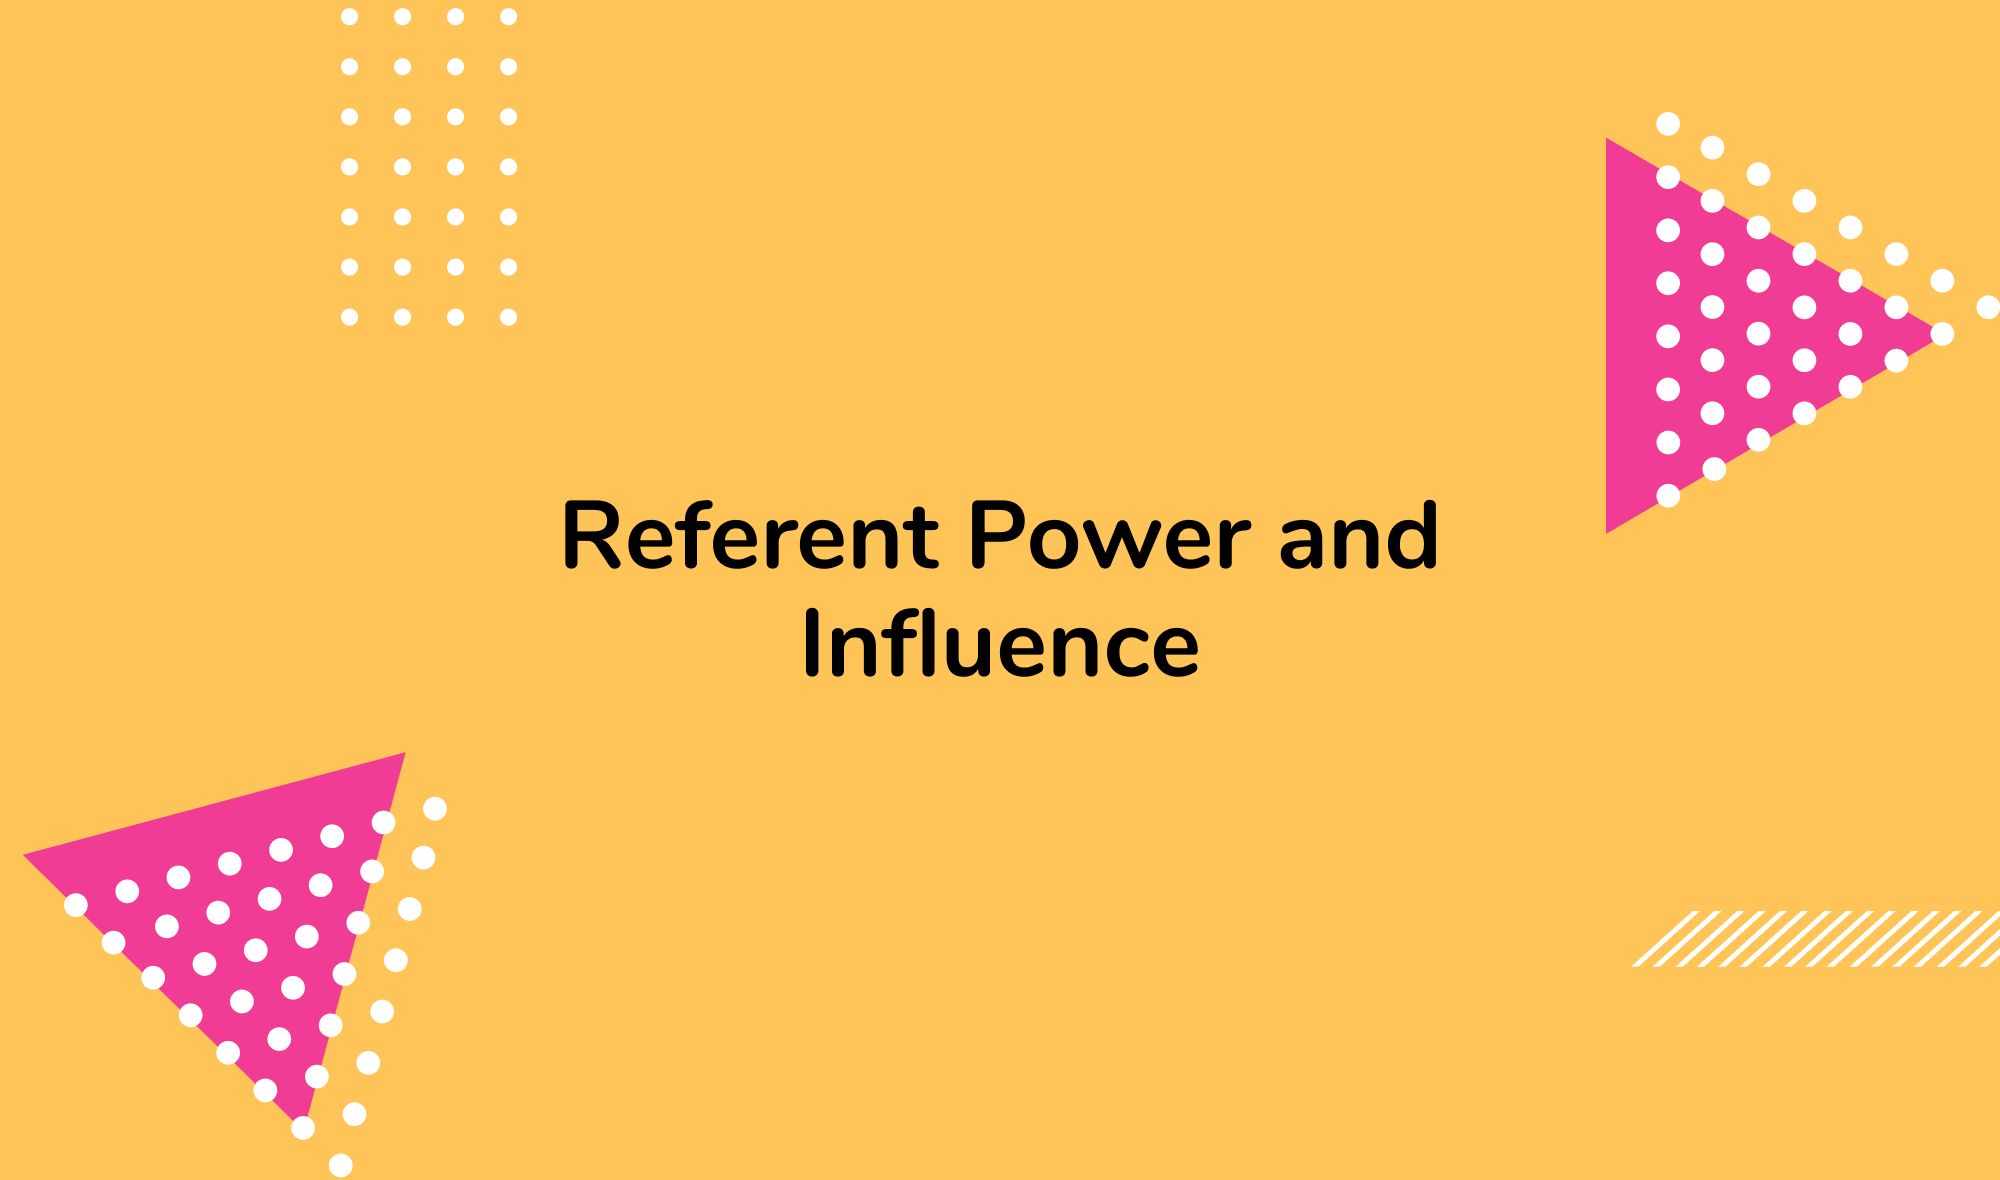 Referent Power and Influence